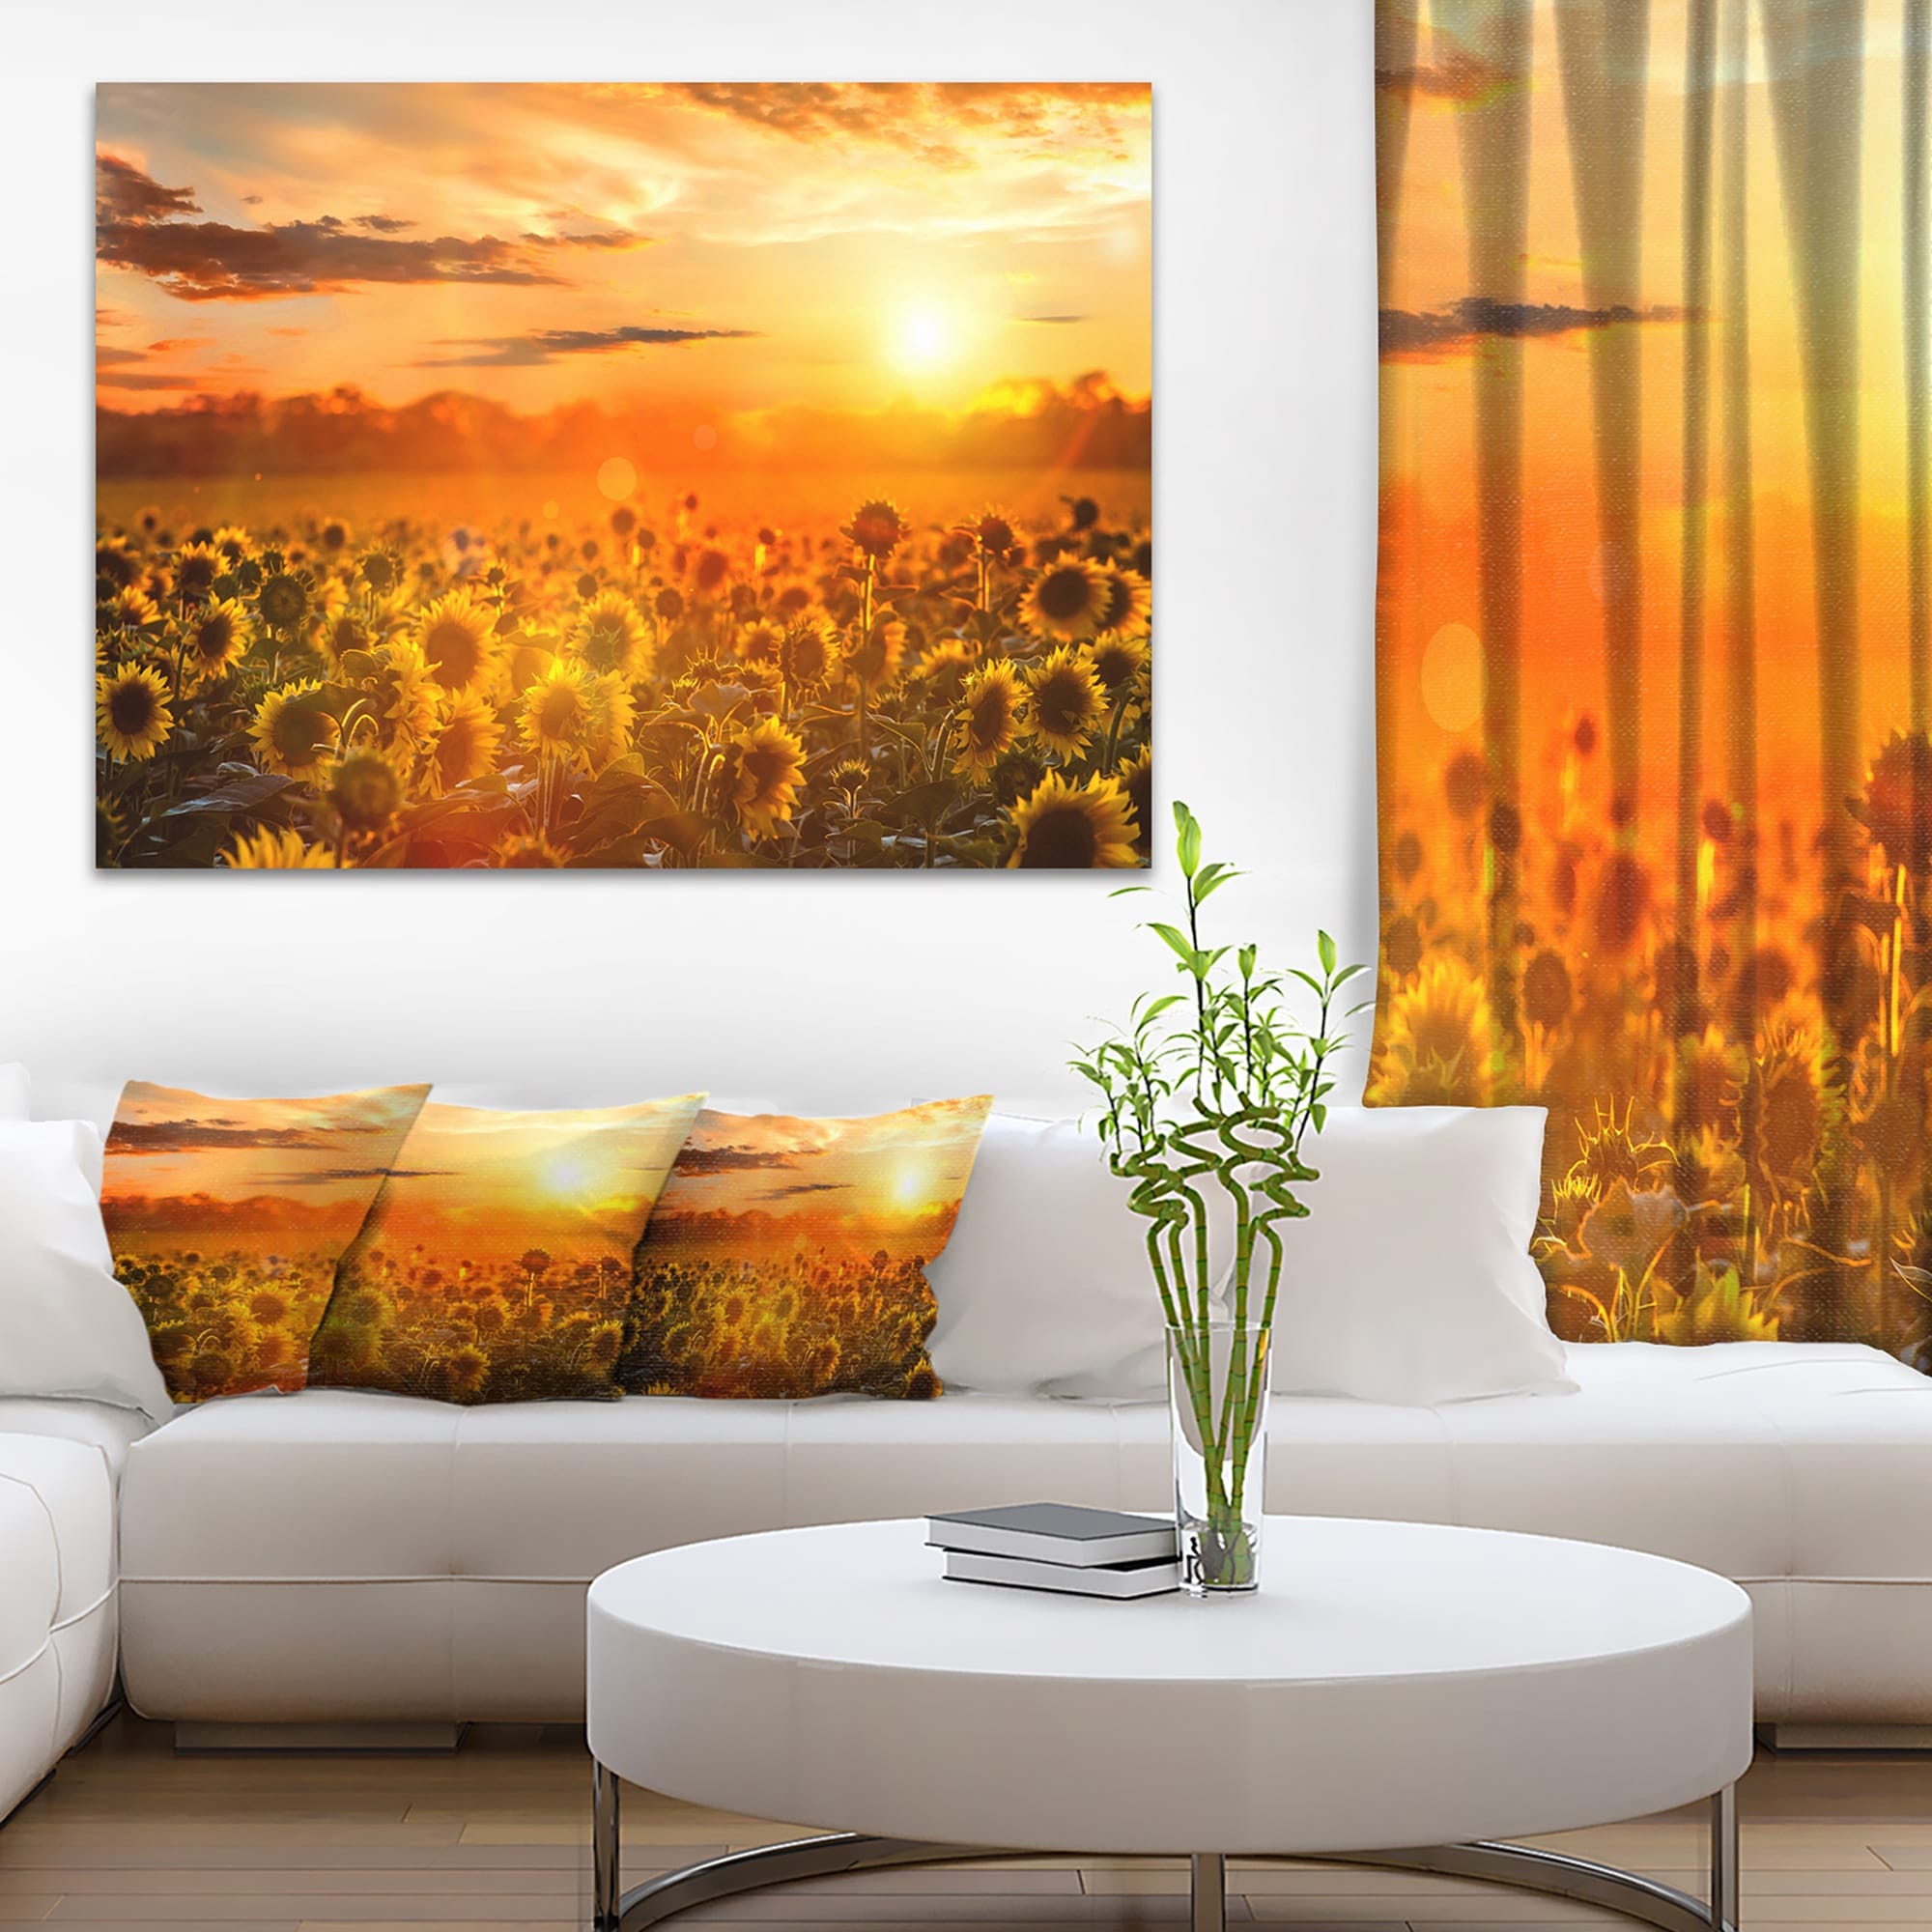 THE COLORS OF TWILIGHT AND SUNSET high Photo print canvas choose your size! 